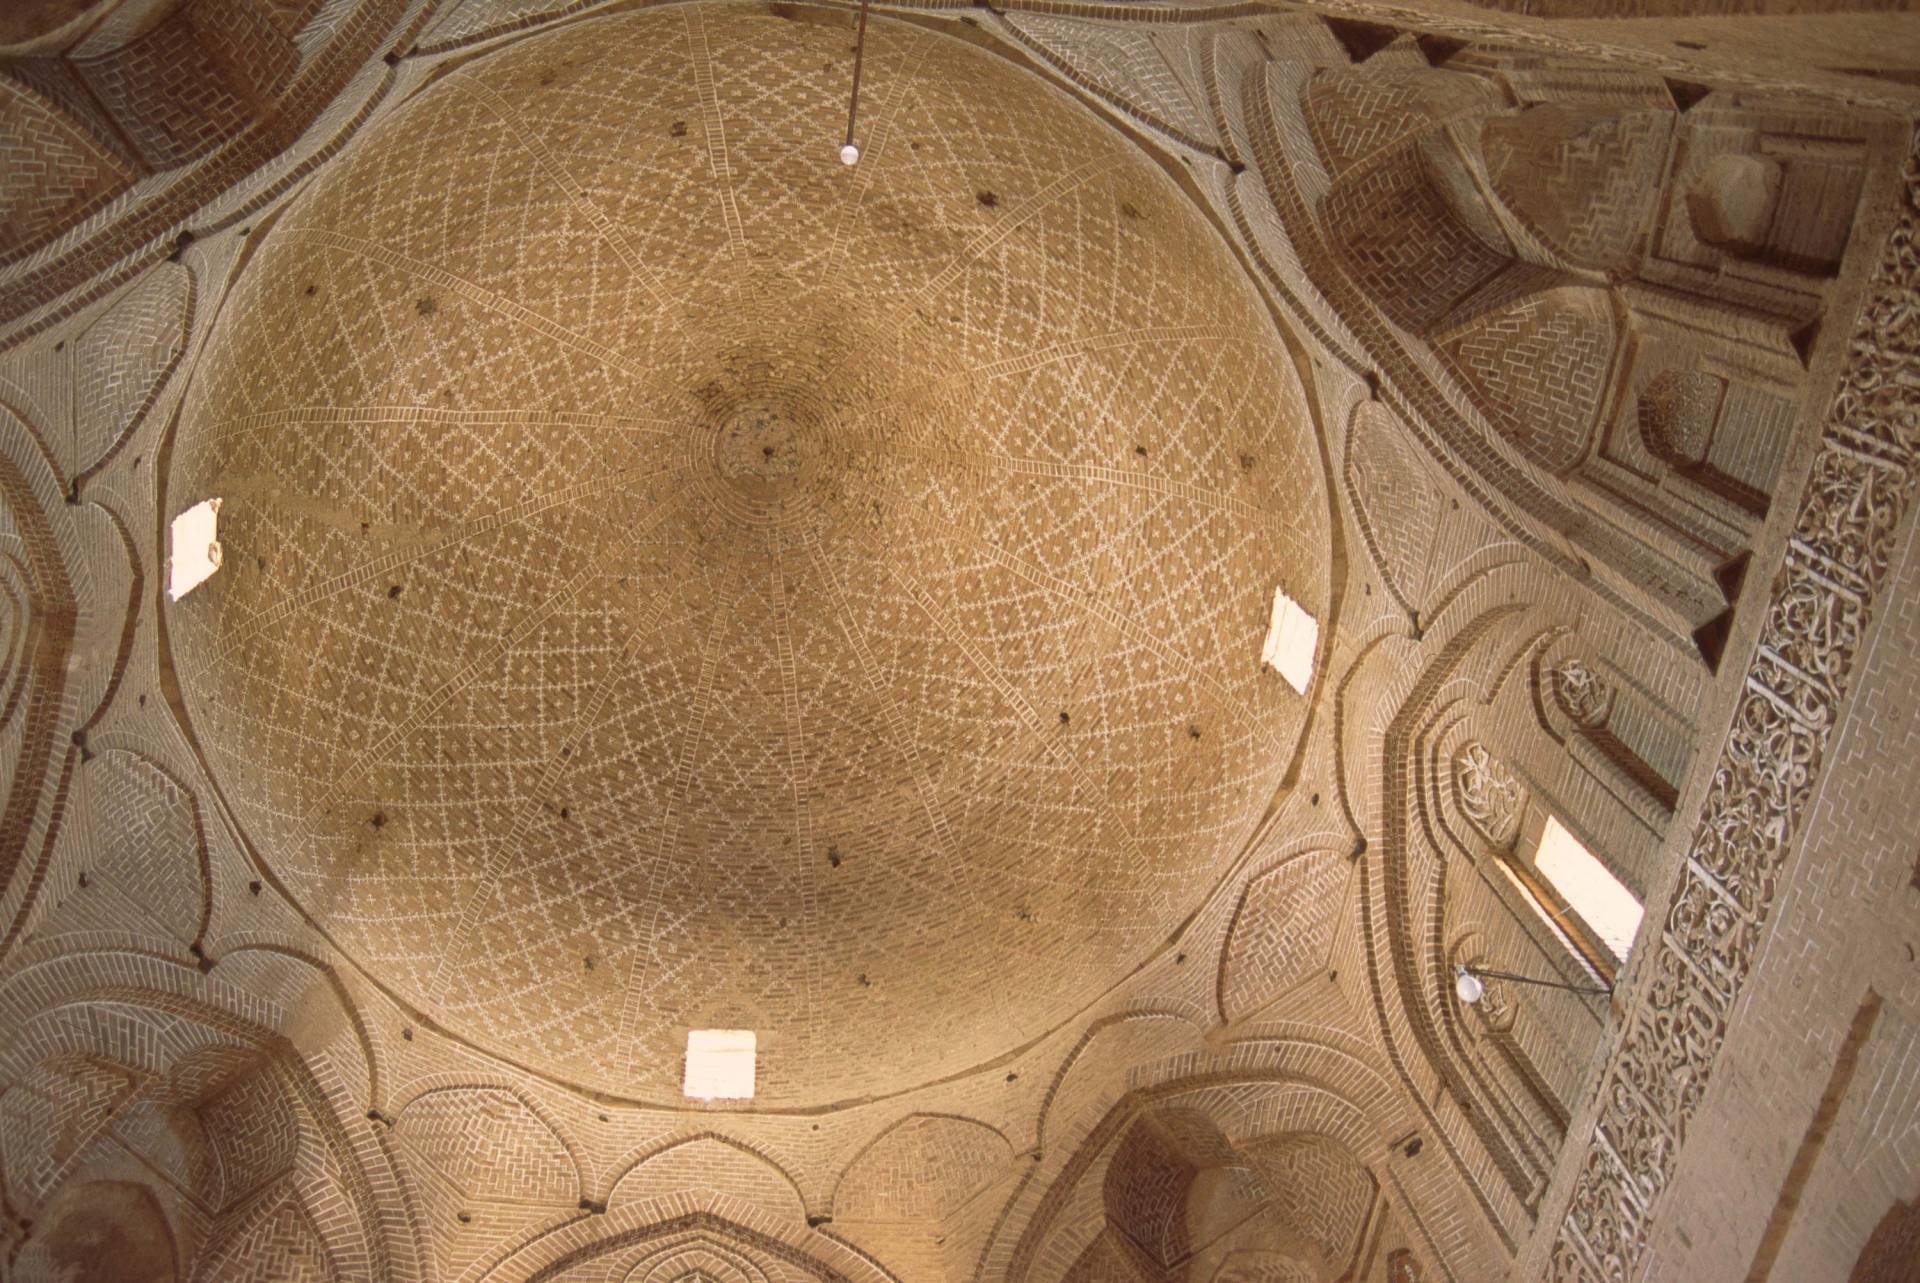 Dome of Ardestan Friday Mosque